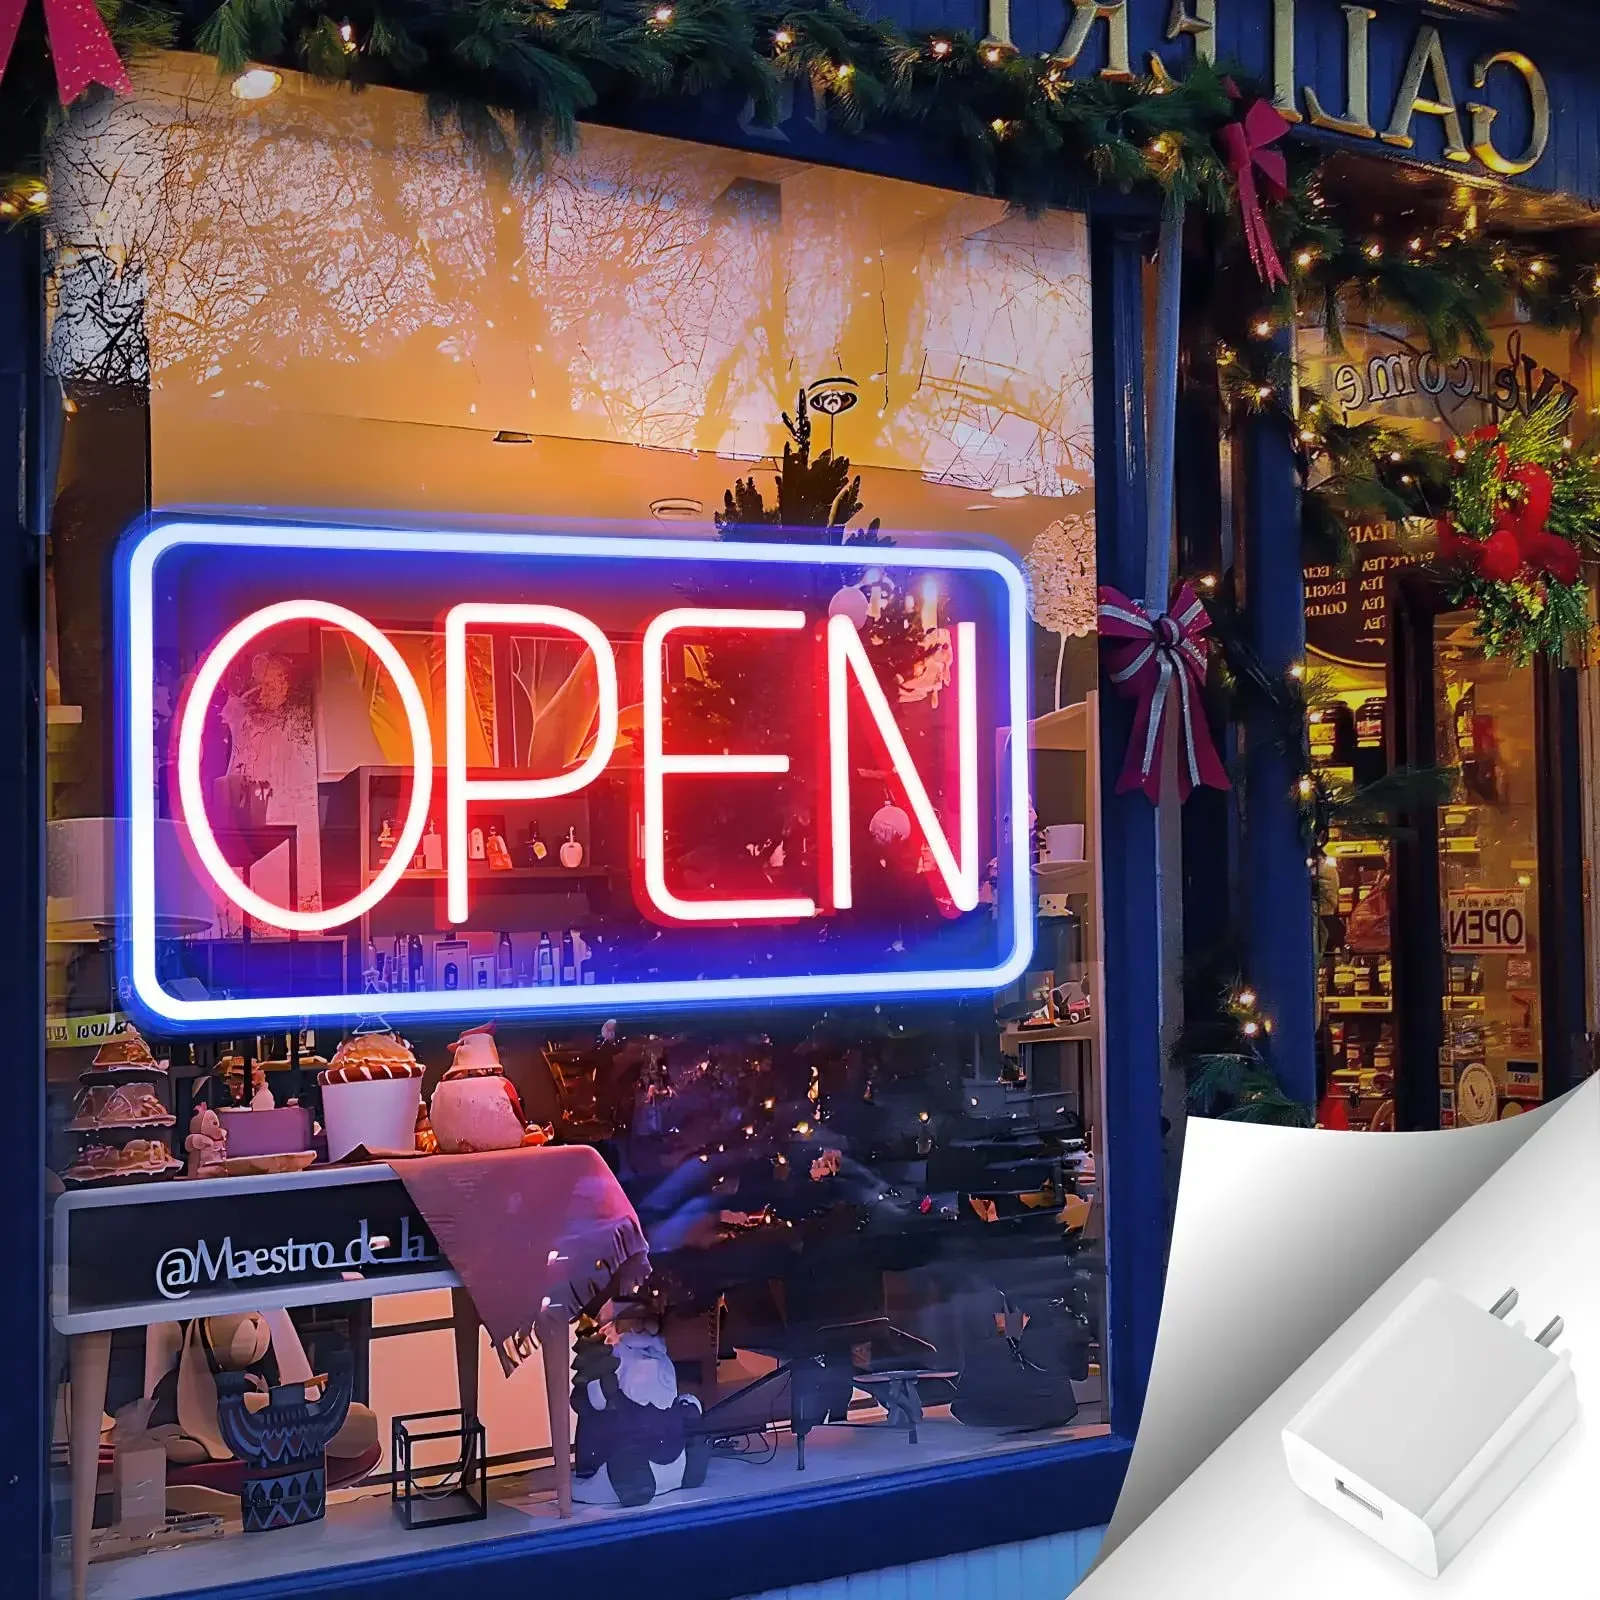 

Open LED Neon Sign For Business Neon Lights Open Sign Led Wall Decor Neon Led Signs Adjustable Brightness Bar Salon Stores Hotel